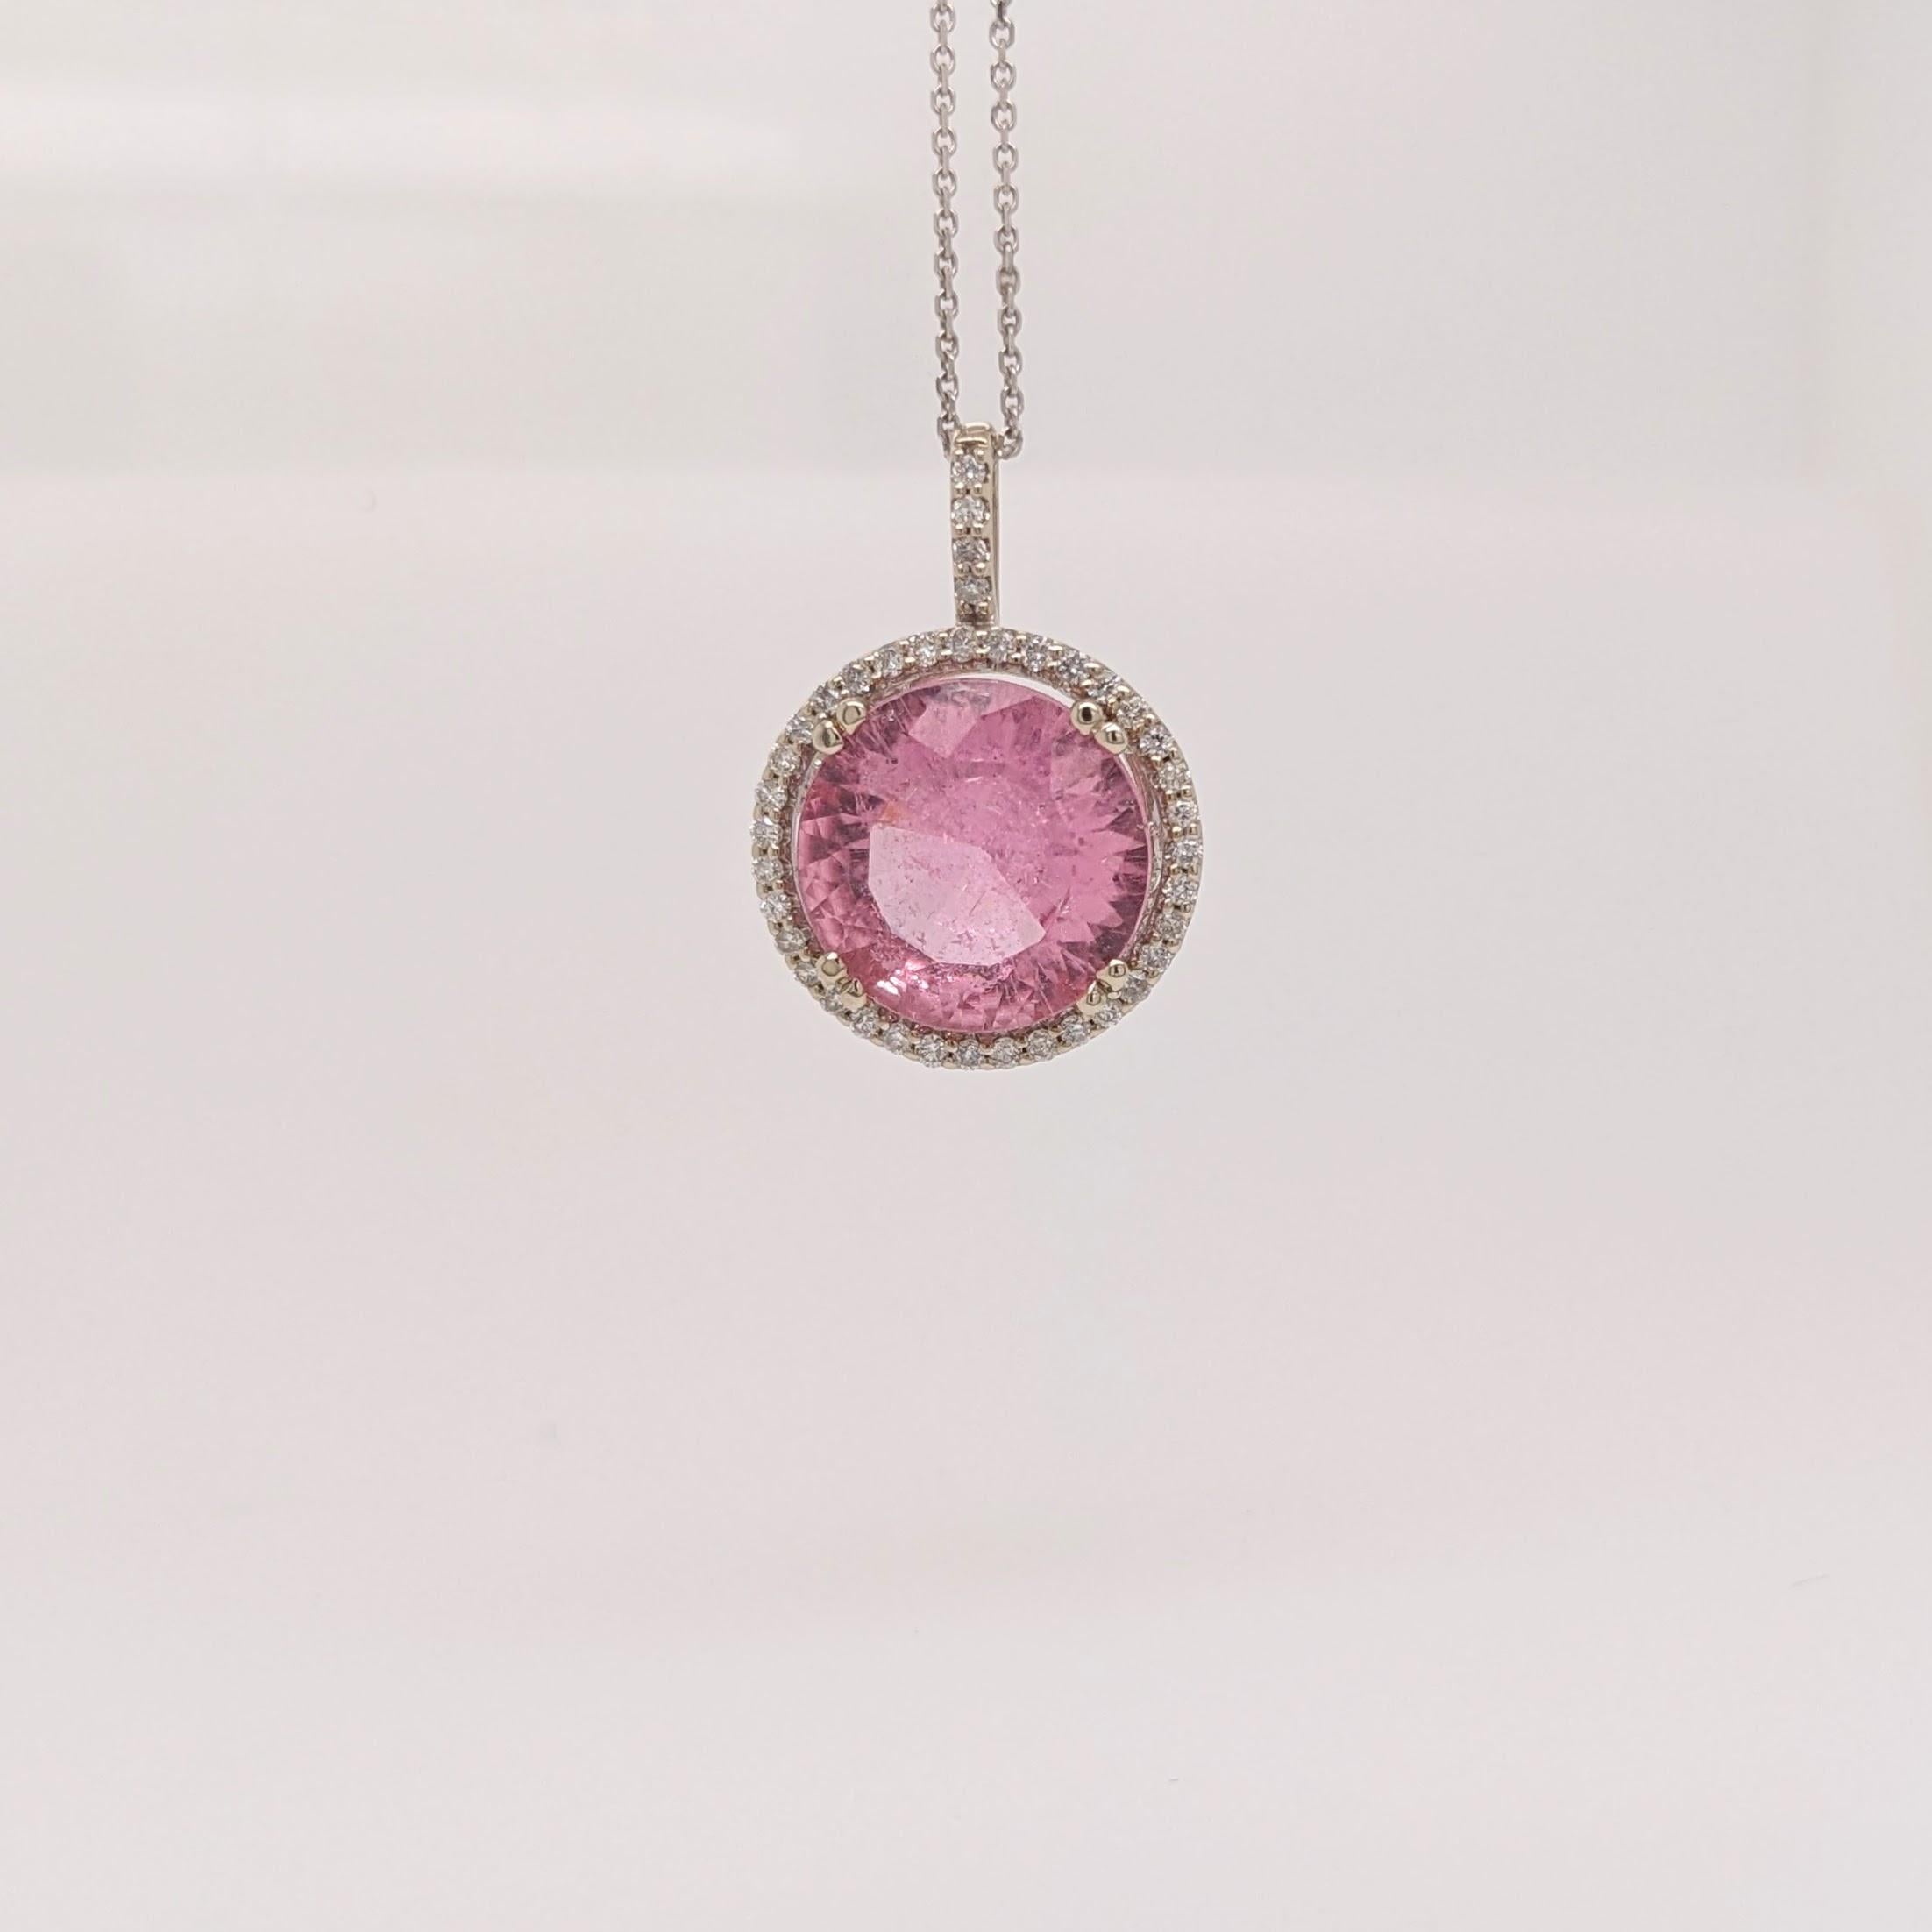 A beautifully cut bubble gum pink tourmaline pendant with natural diamonds!

Specifications:

Item Type: Pendant

Stone Specs:
Type: Tourmaline
Treatment: Heated
Hardness: 7-7.5
Shape: Round
Size: 12.5mm
Weight: 7.96 cts

Metal: 14k/2.34